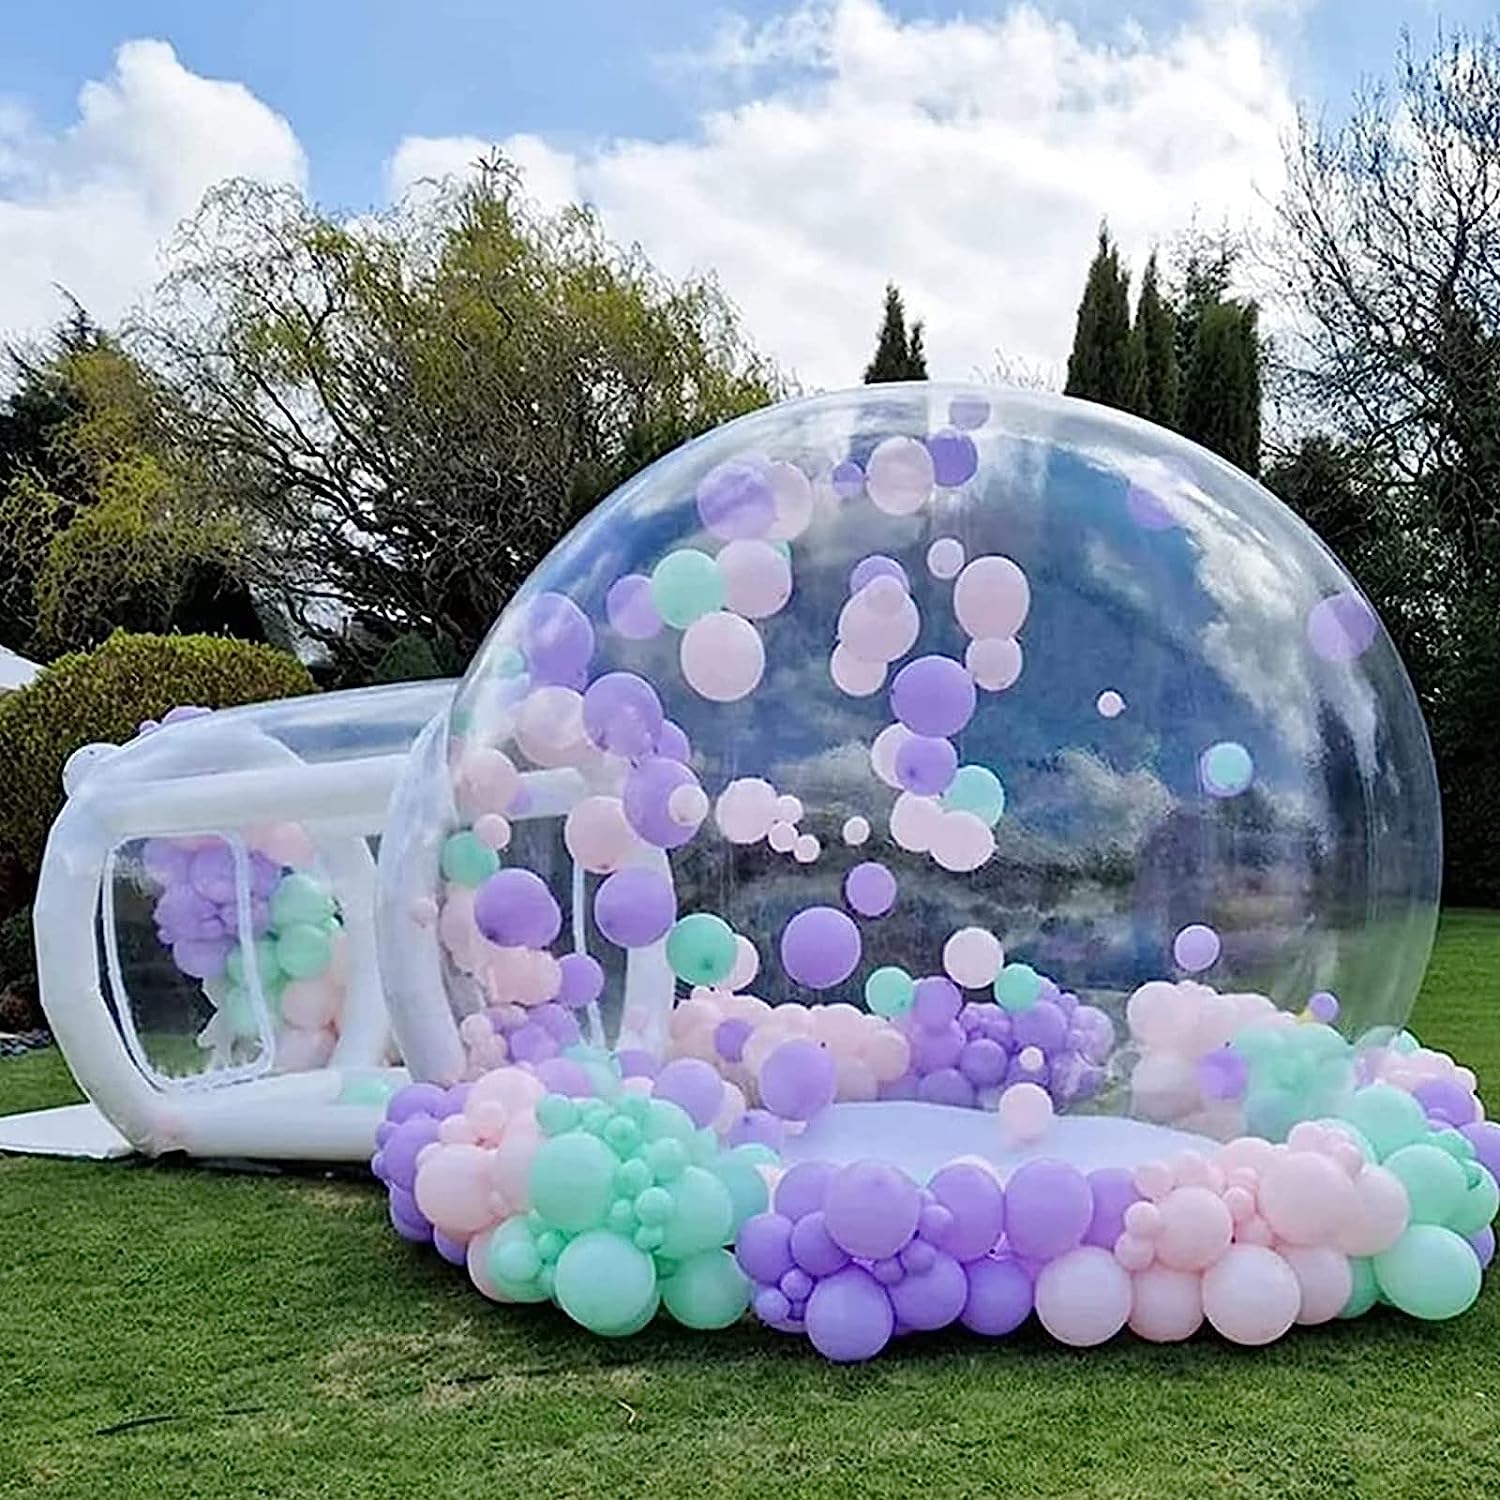 Inflatable Balloon Bubble House Clear Bubble Tent Bubble Dome House Inflatable Giant Balloon Globe